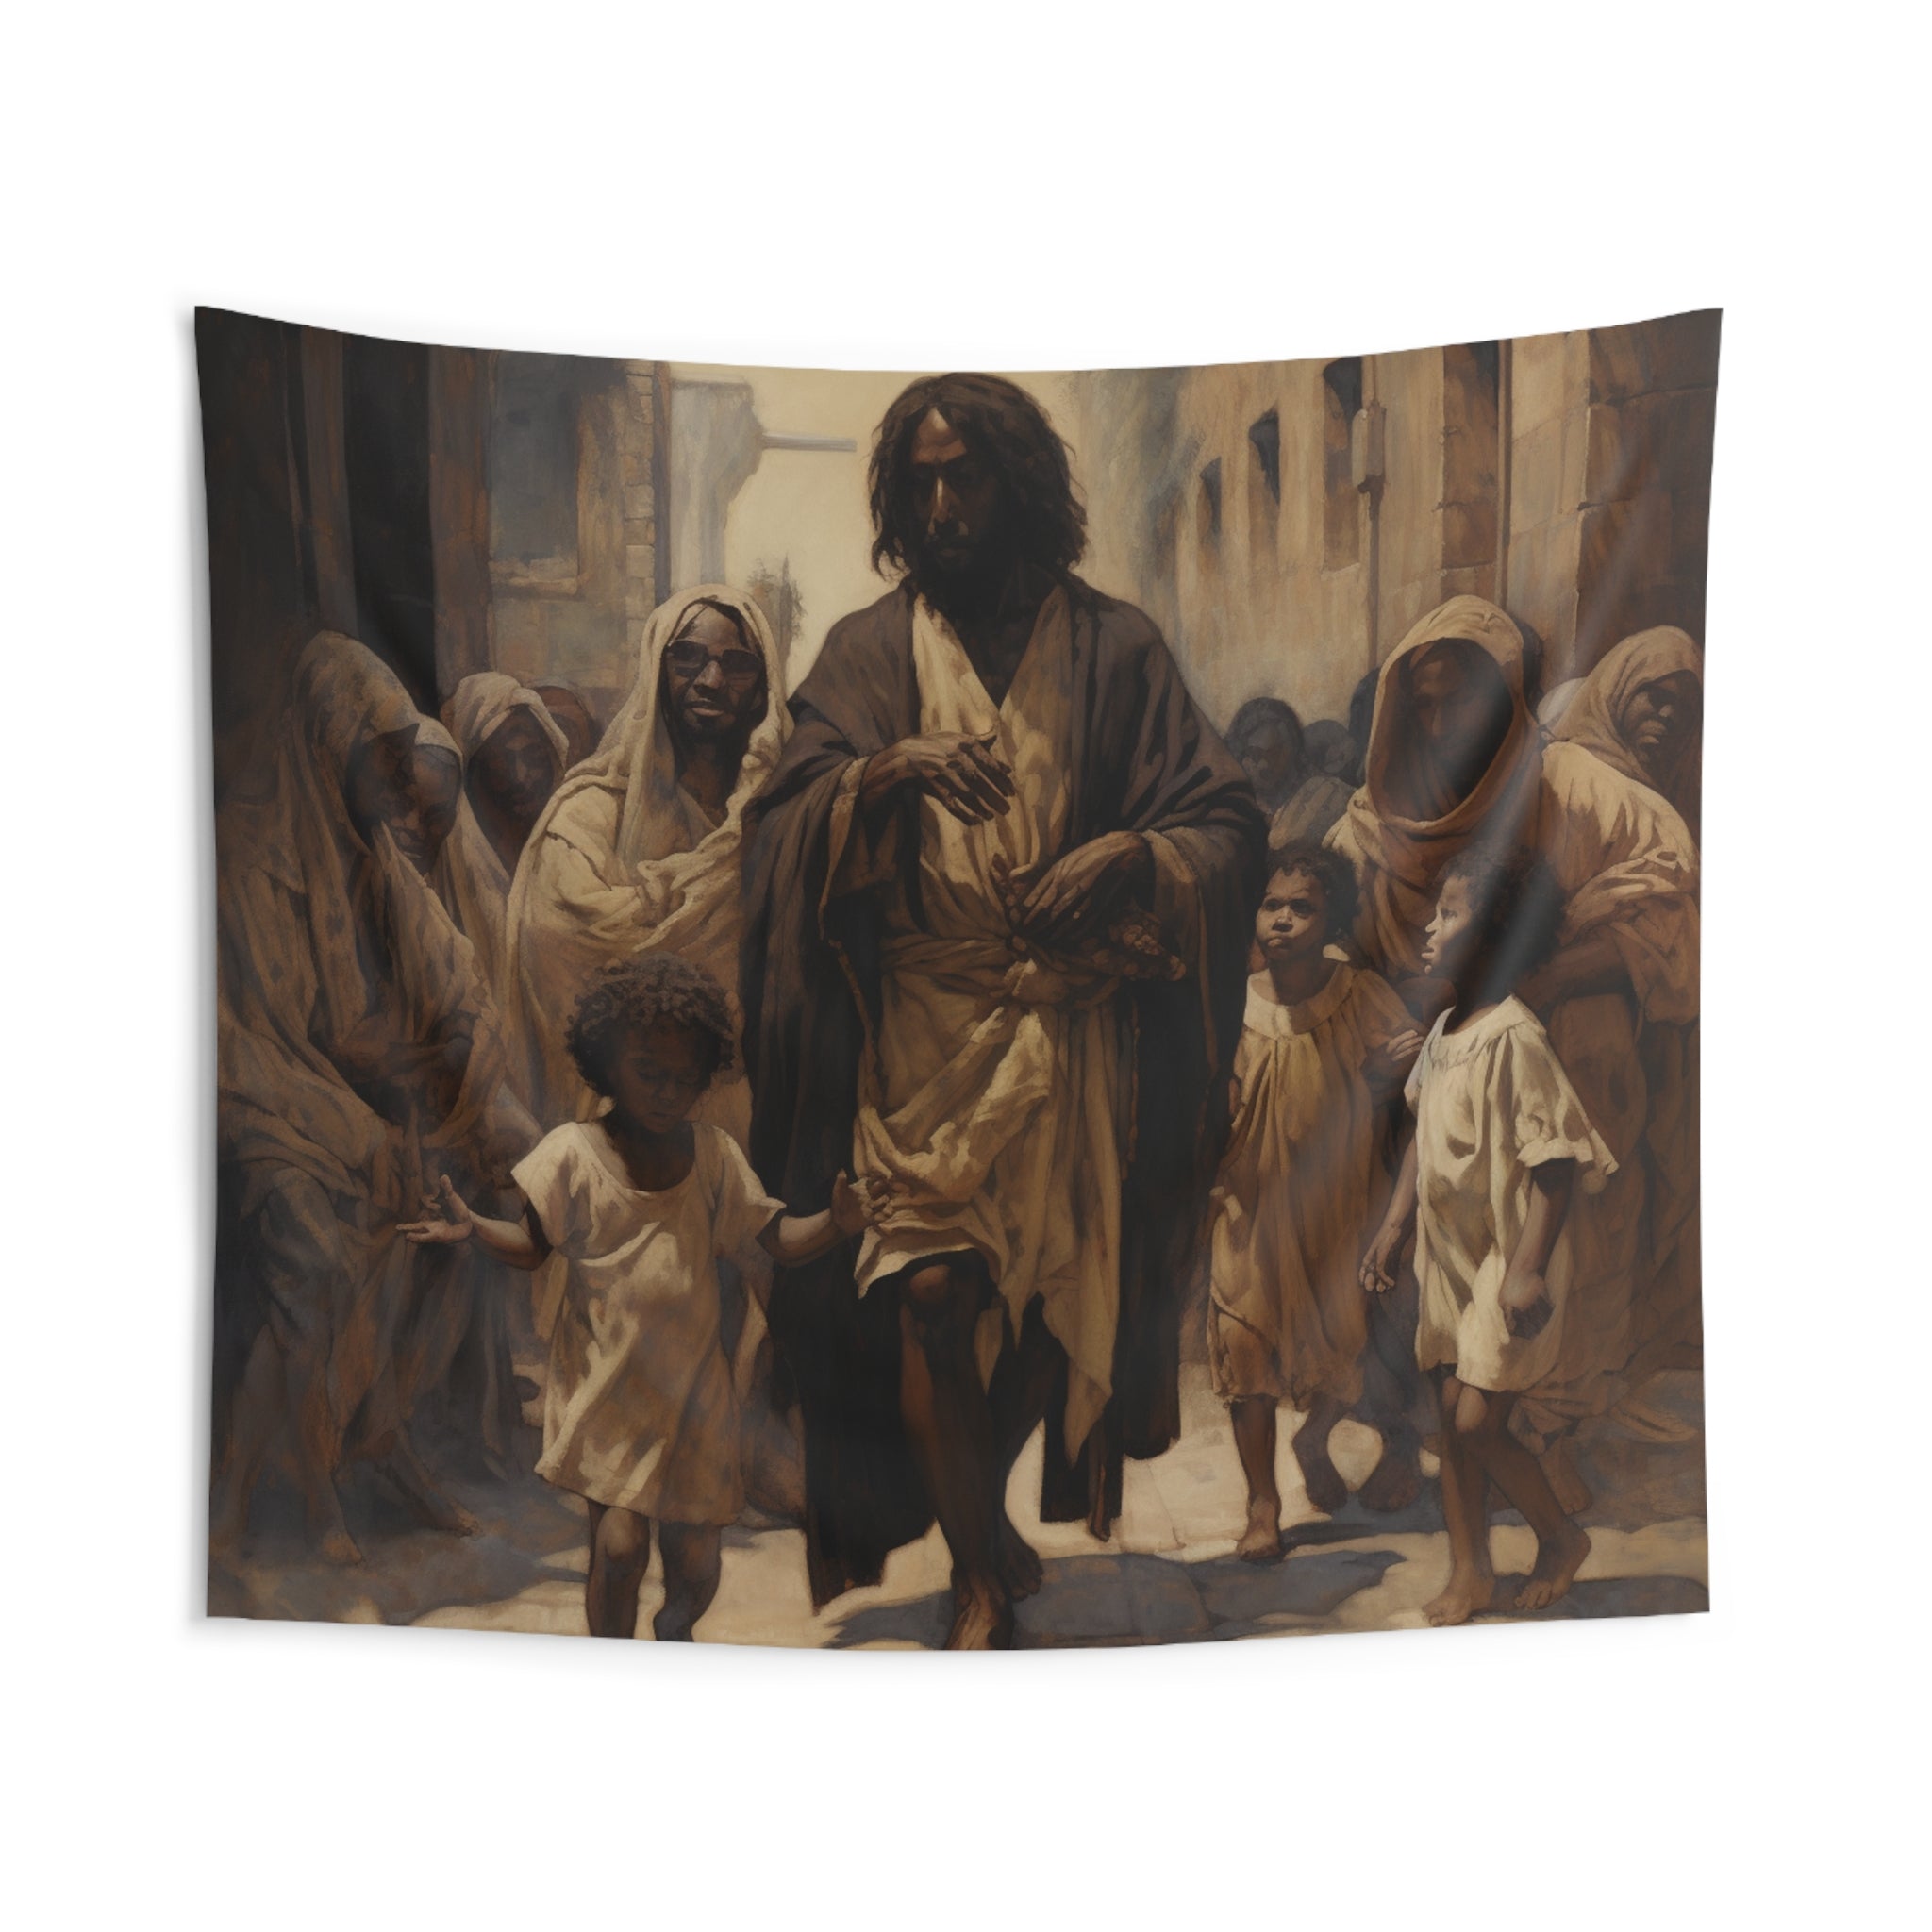 An elegant and inspirational wall tapestry featuring the phrase "God Is Love - 1 John 4:8" in beautiful, flowing script set against a serene background. The tapestry is designed to complement any room, adding a touch of spiritual serenity and divine elegance. Its high-quality fabric ensures durability and color vibrancy, making it a perfect addition to any space seeking inspiration and peace.